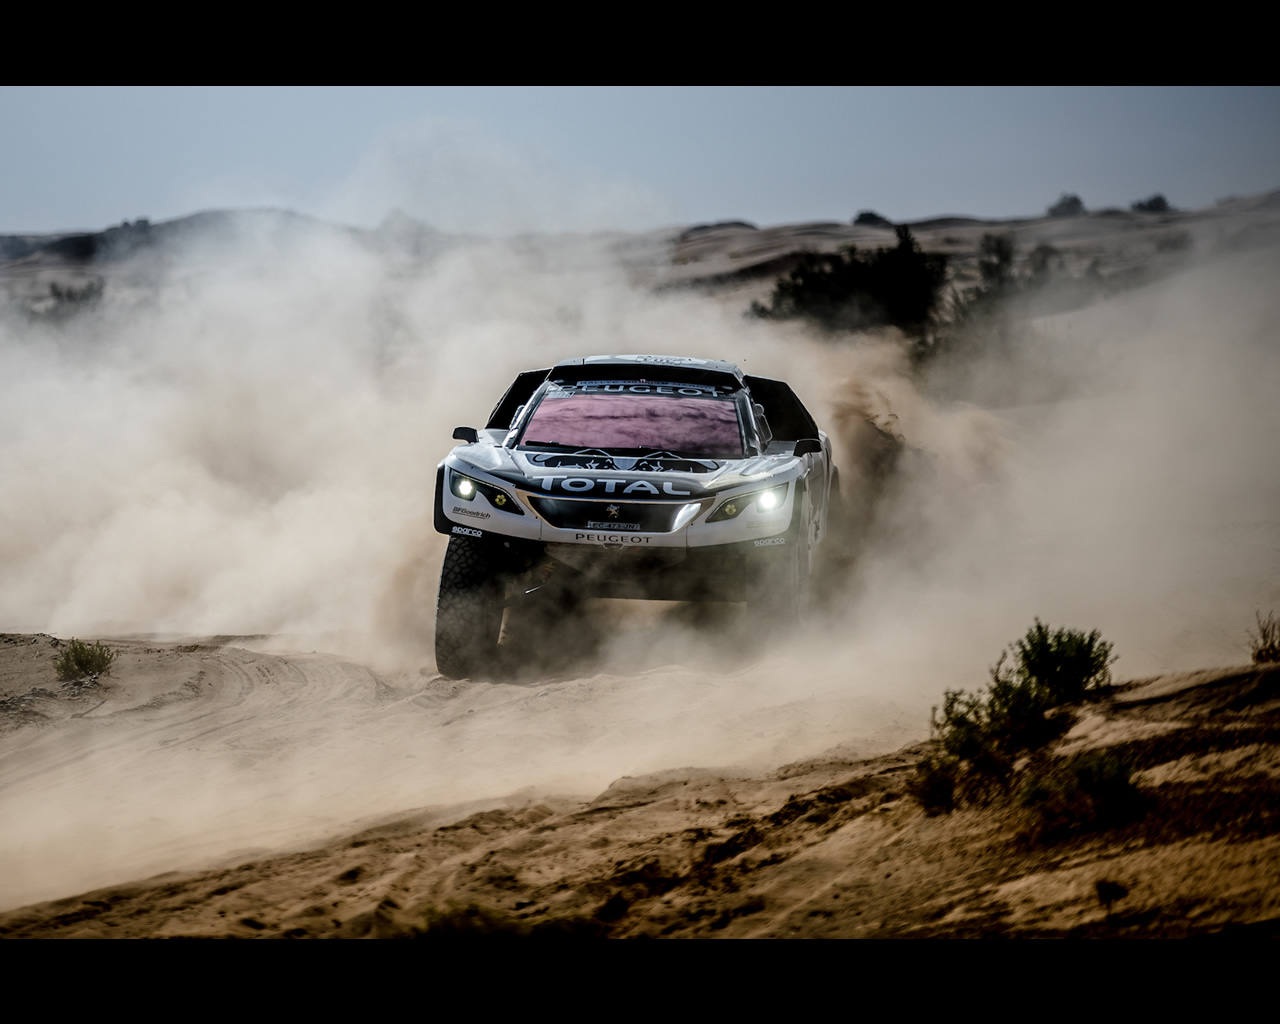 Wallpapers of the Peugeot 3008 DKR 2017 (click on image to enlarge)